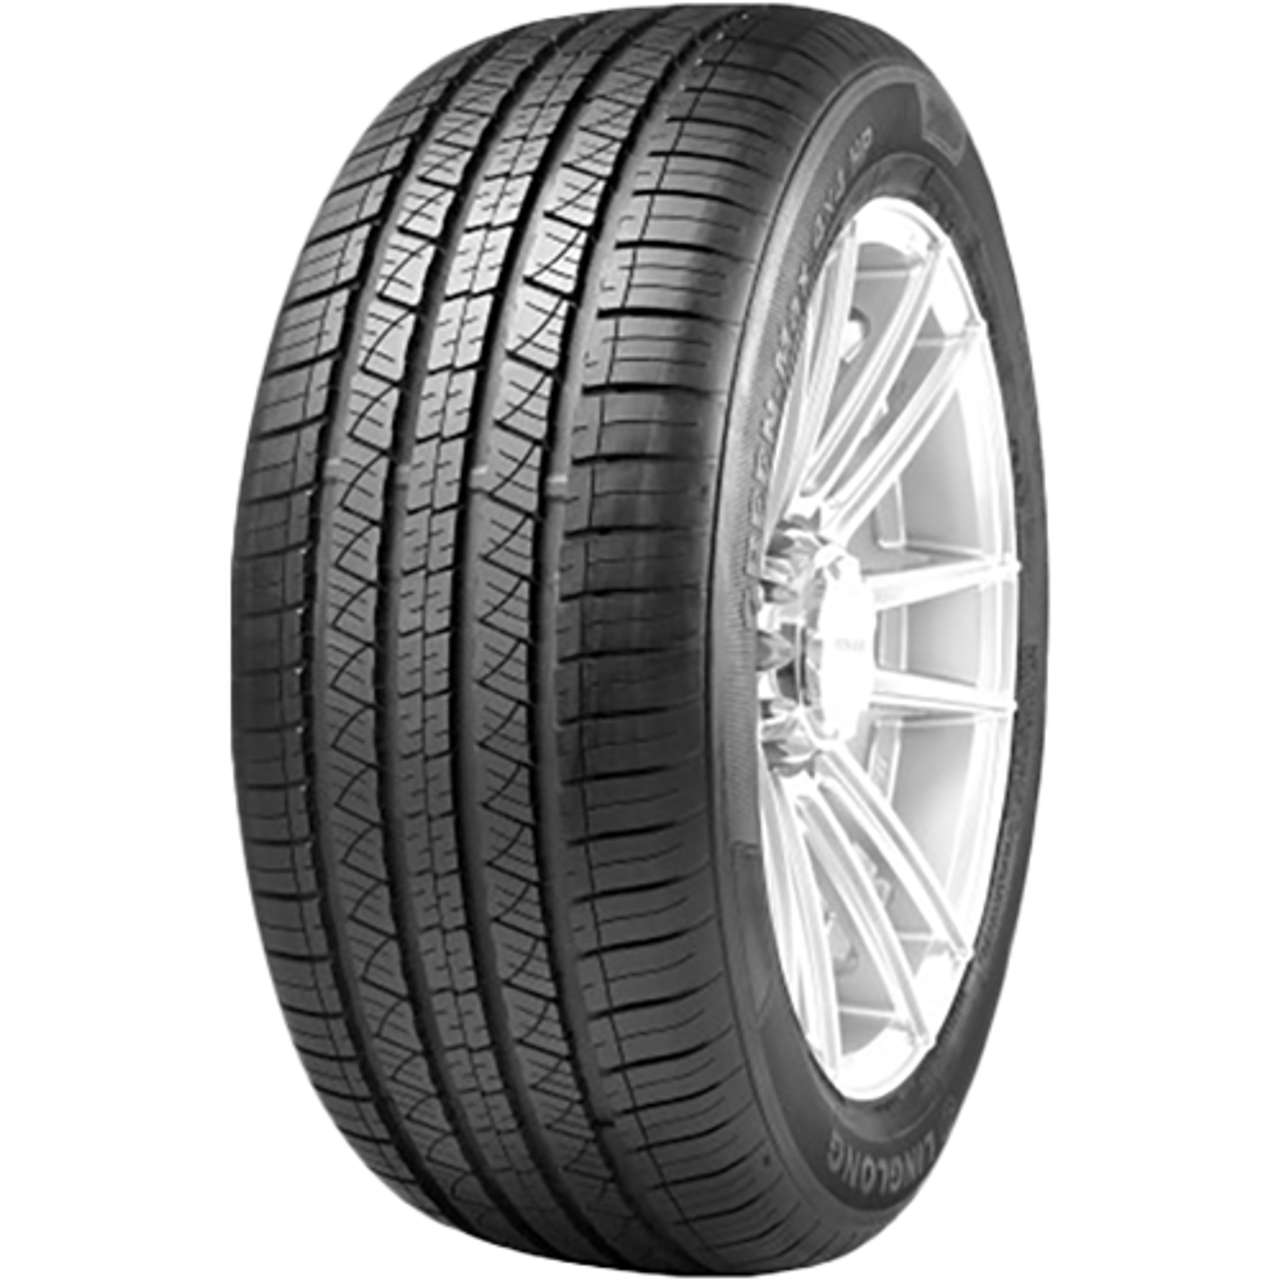 LINGLONG GREEN-MAX 4X4 HP 285/35R22 106V BSW